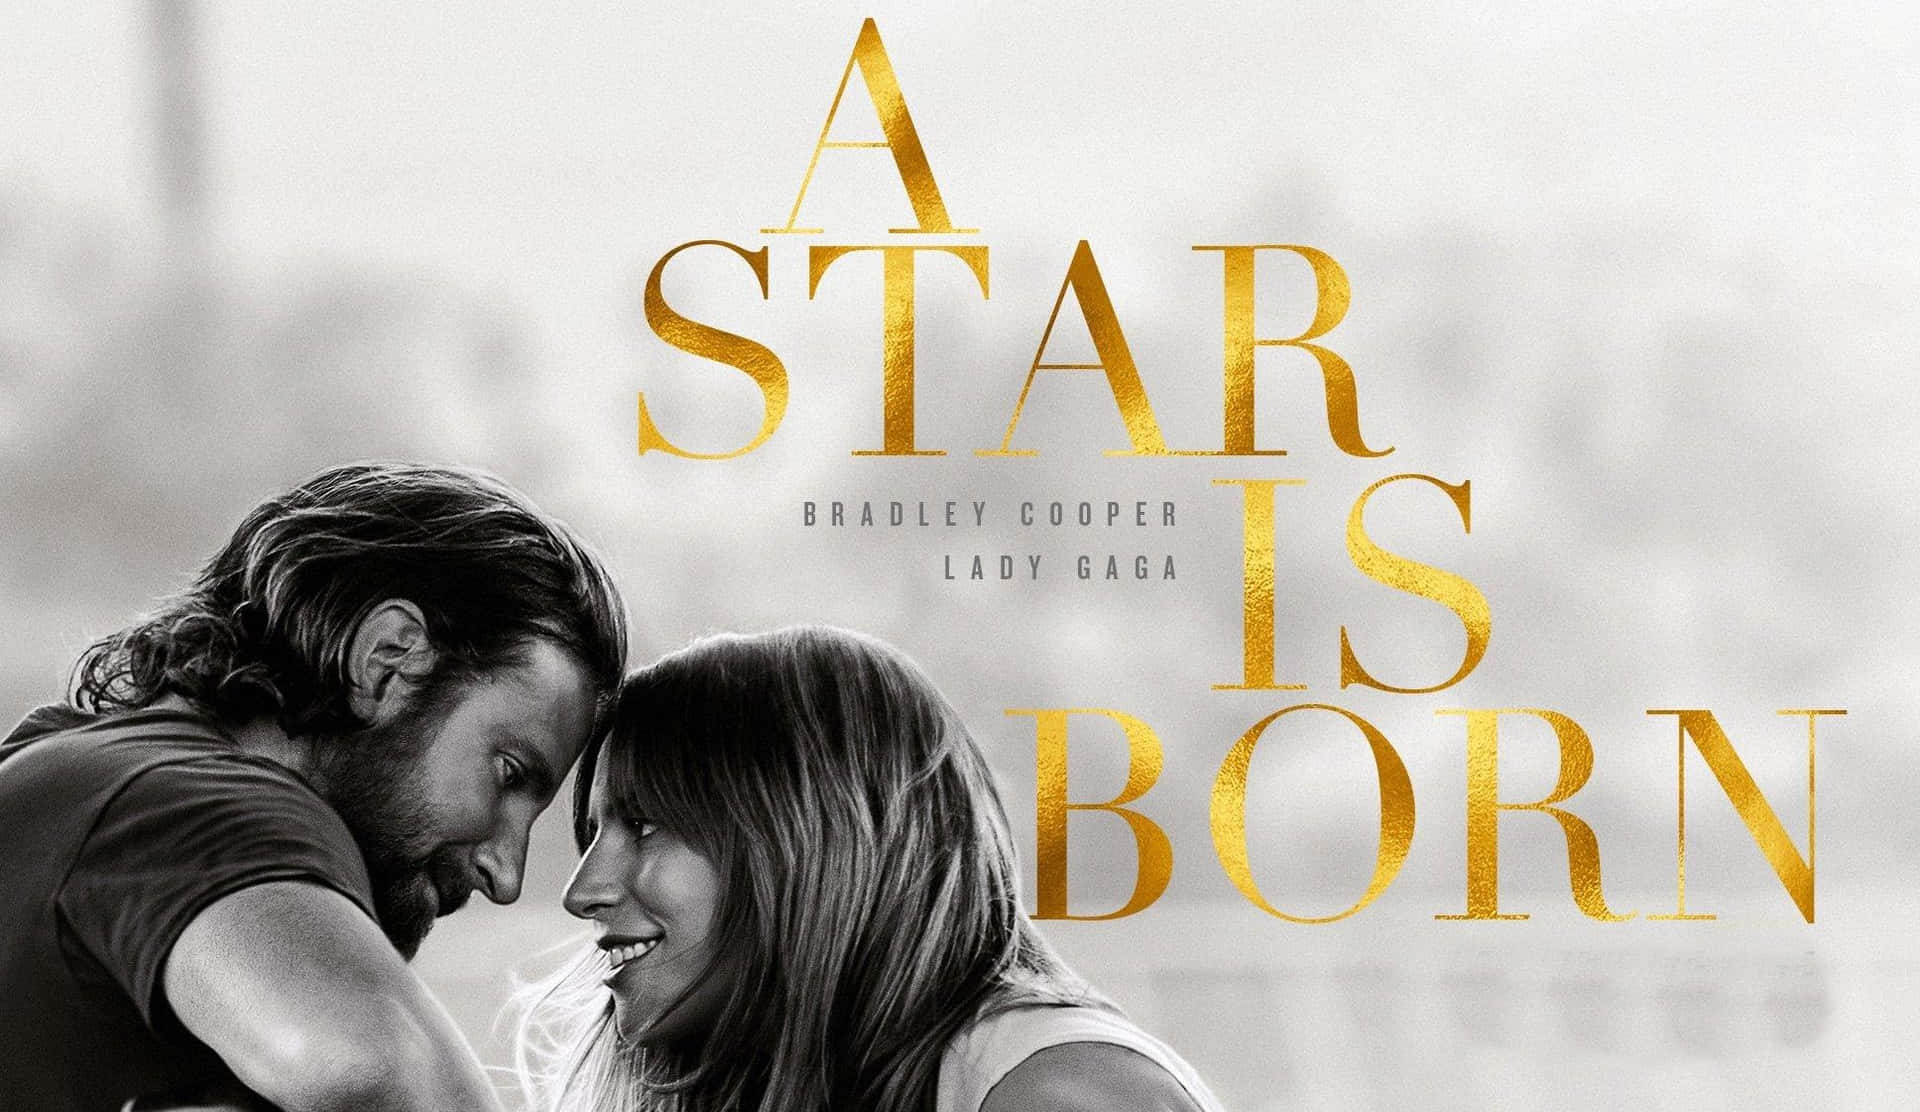 Caption: Mesmerizing Moment In A Star Is Born Wallpaper